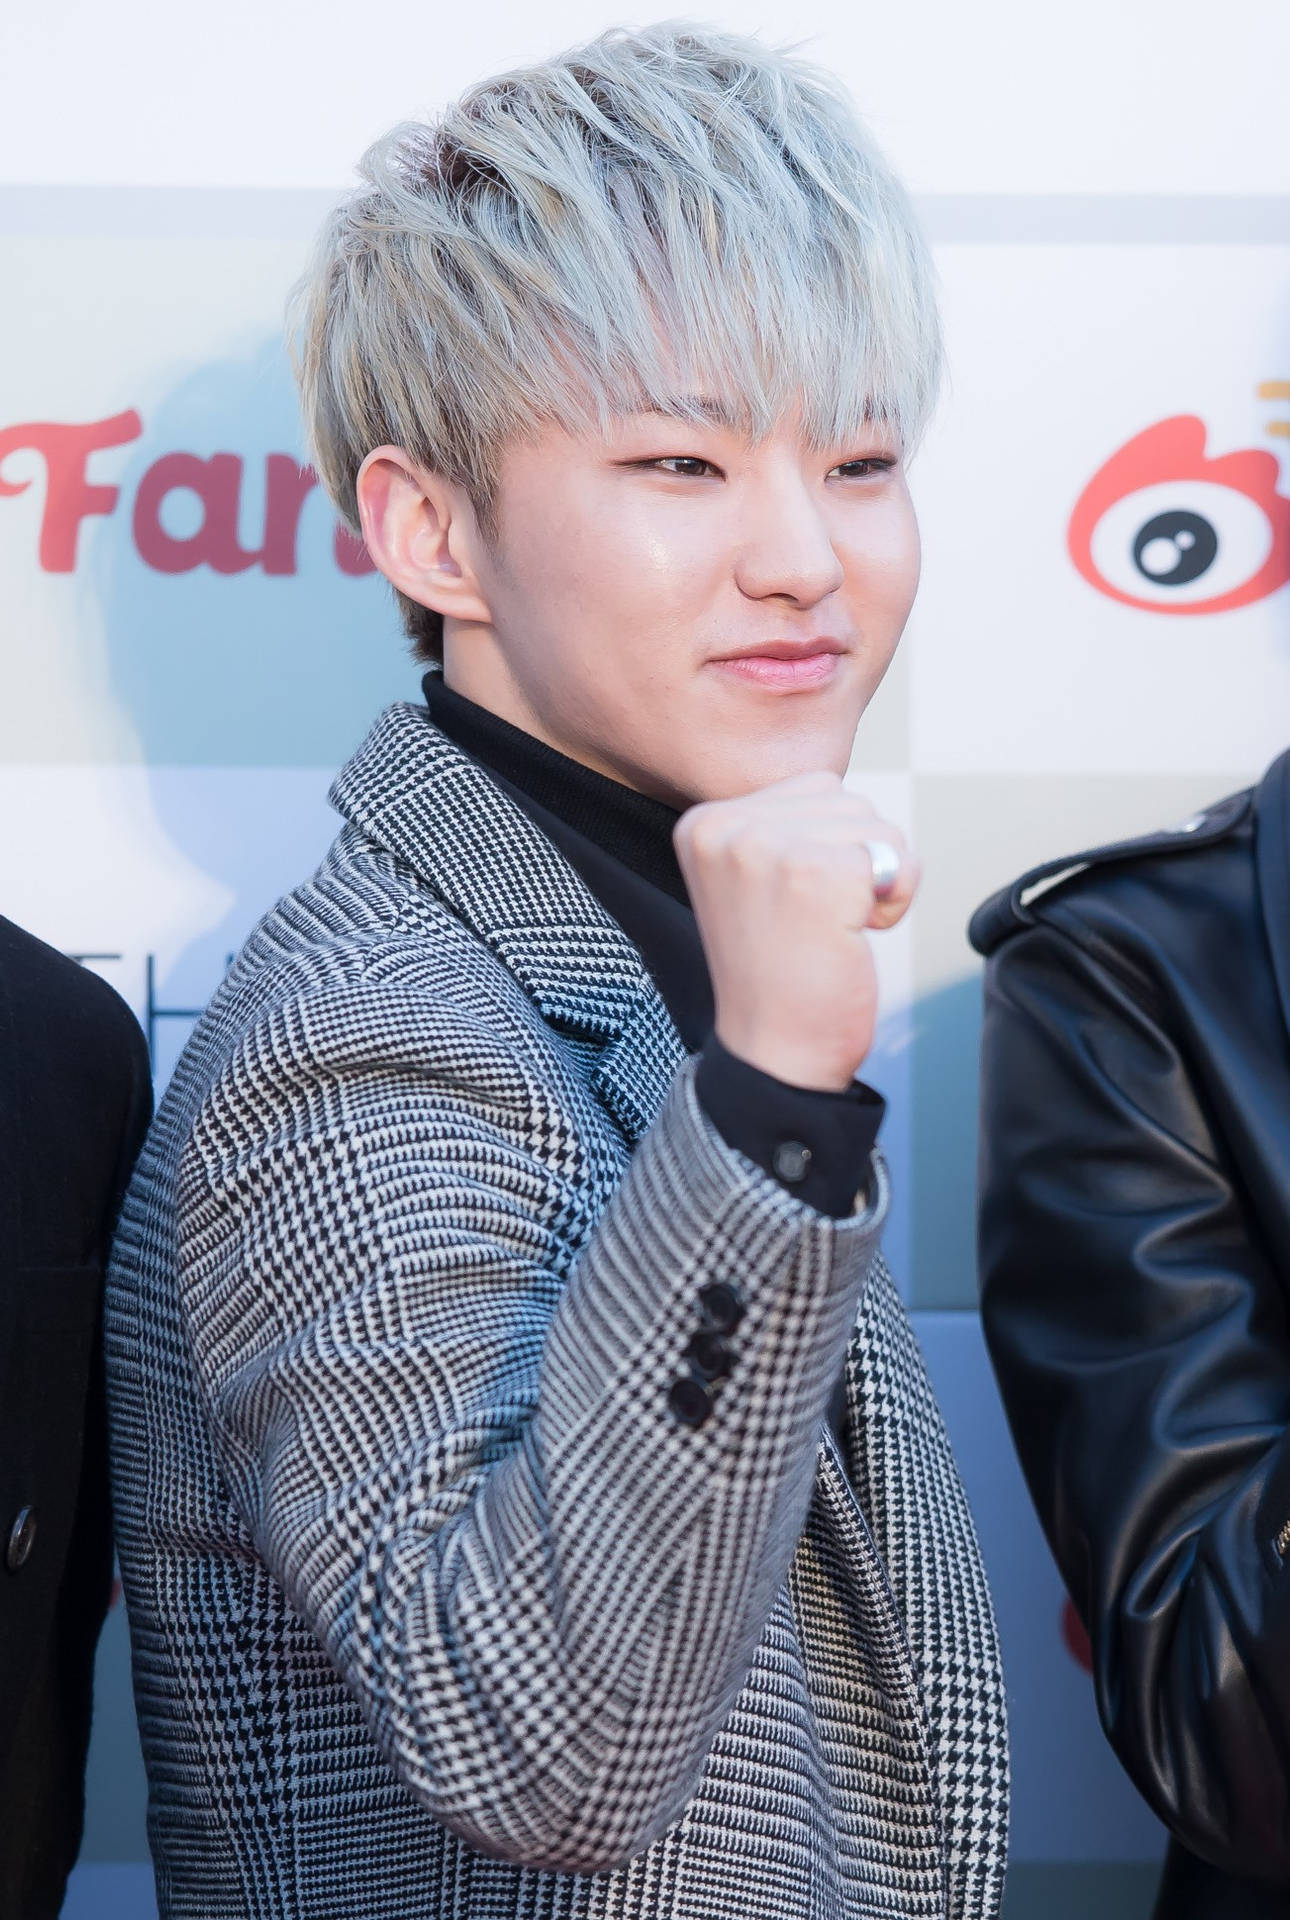 Hoshi With Silver Hair Background